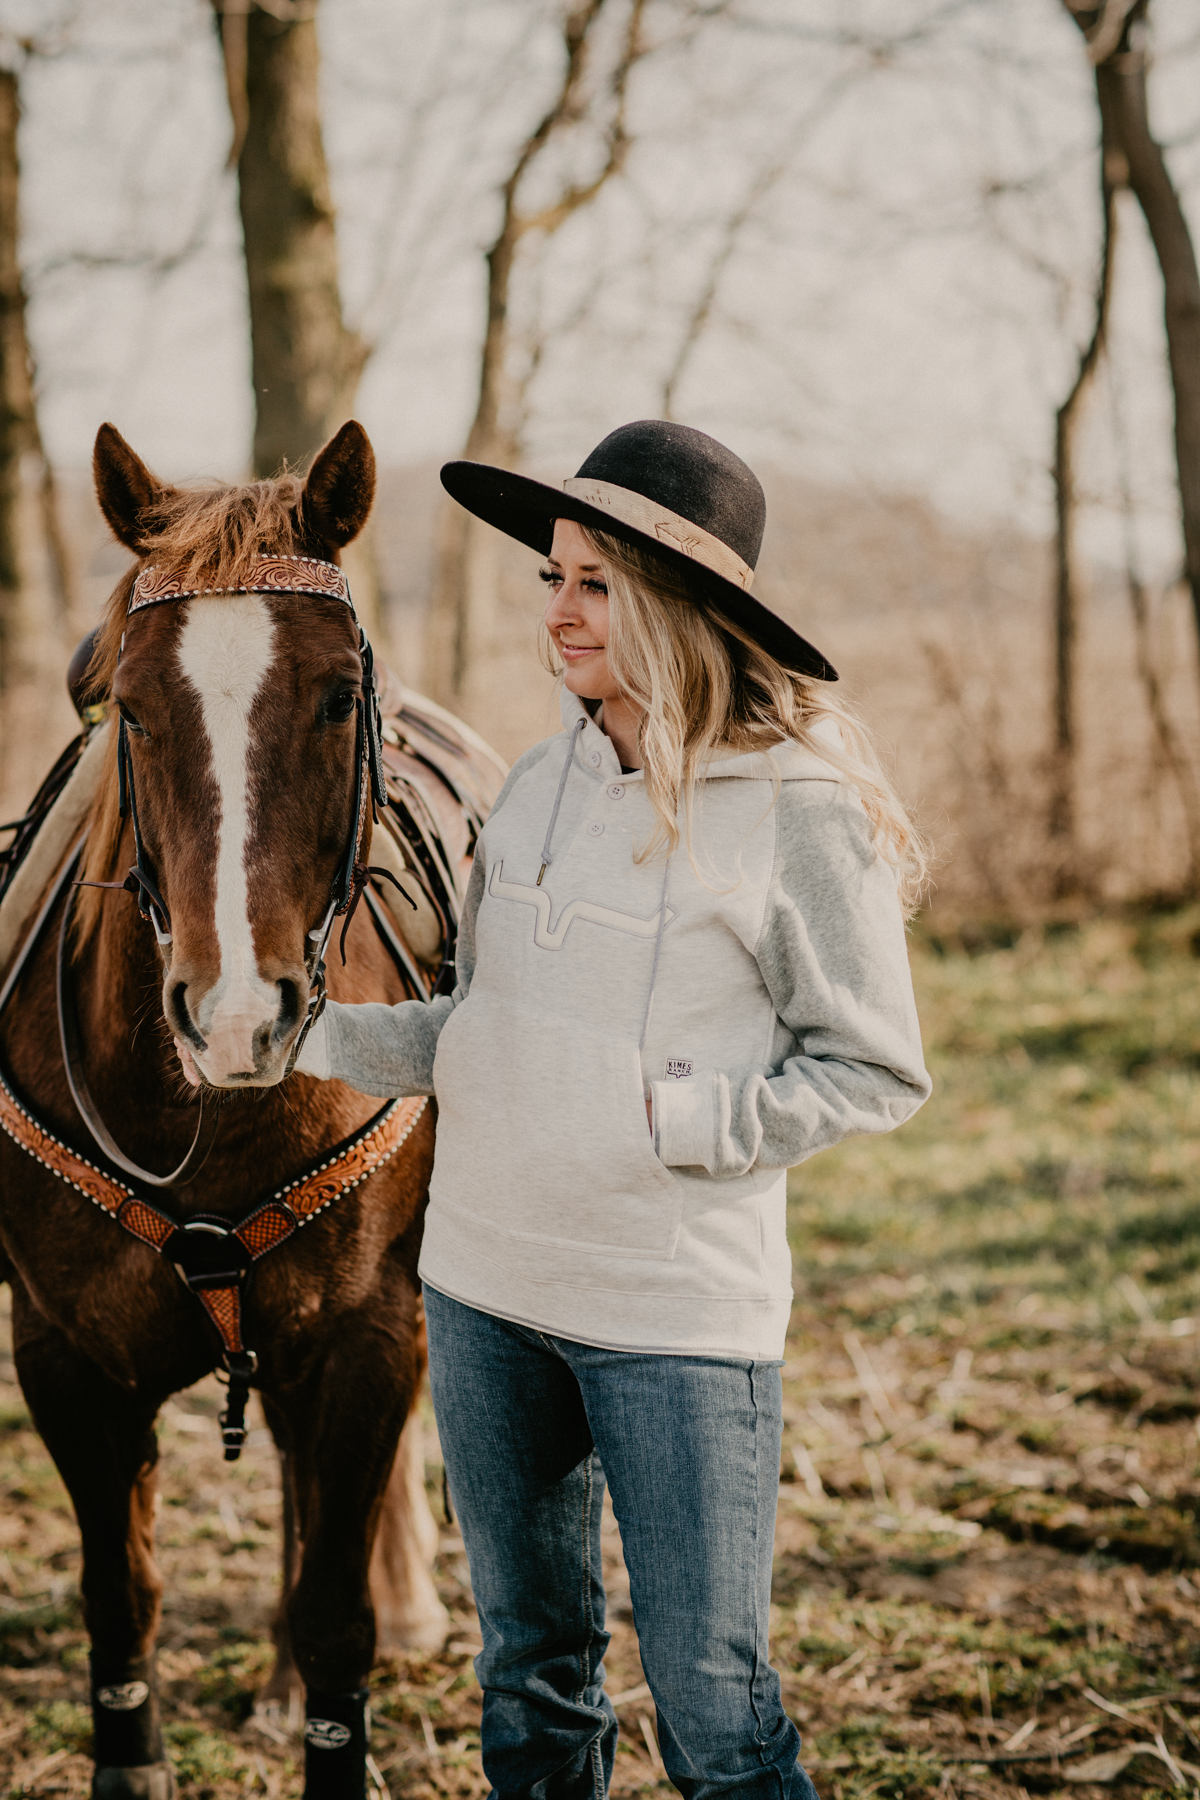 A smiling woman in a black hat stands next to a bay horse, dressed in a casual grey hoodie, embodying a relaxed equestrian style.